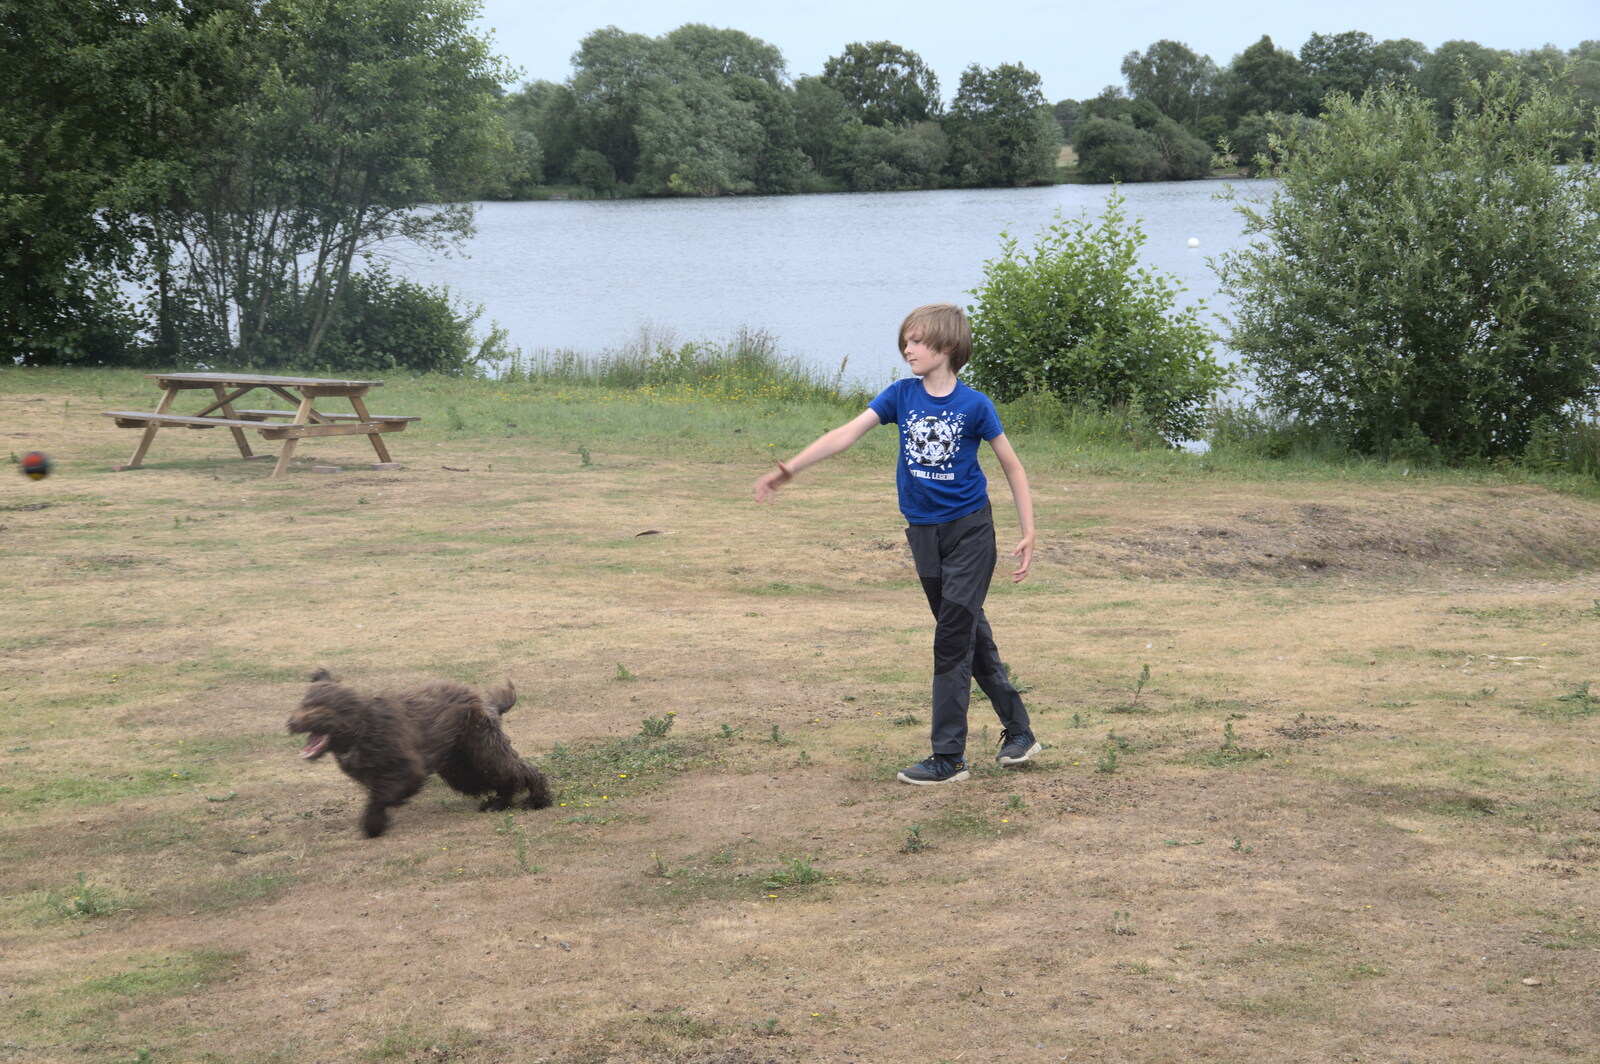 Harry chases the lunatic dog around from Camping at the Lake, Weybread, Harleston - 25th June 2022